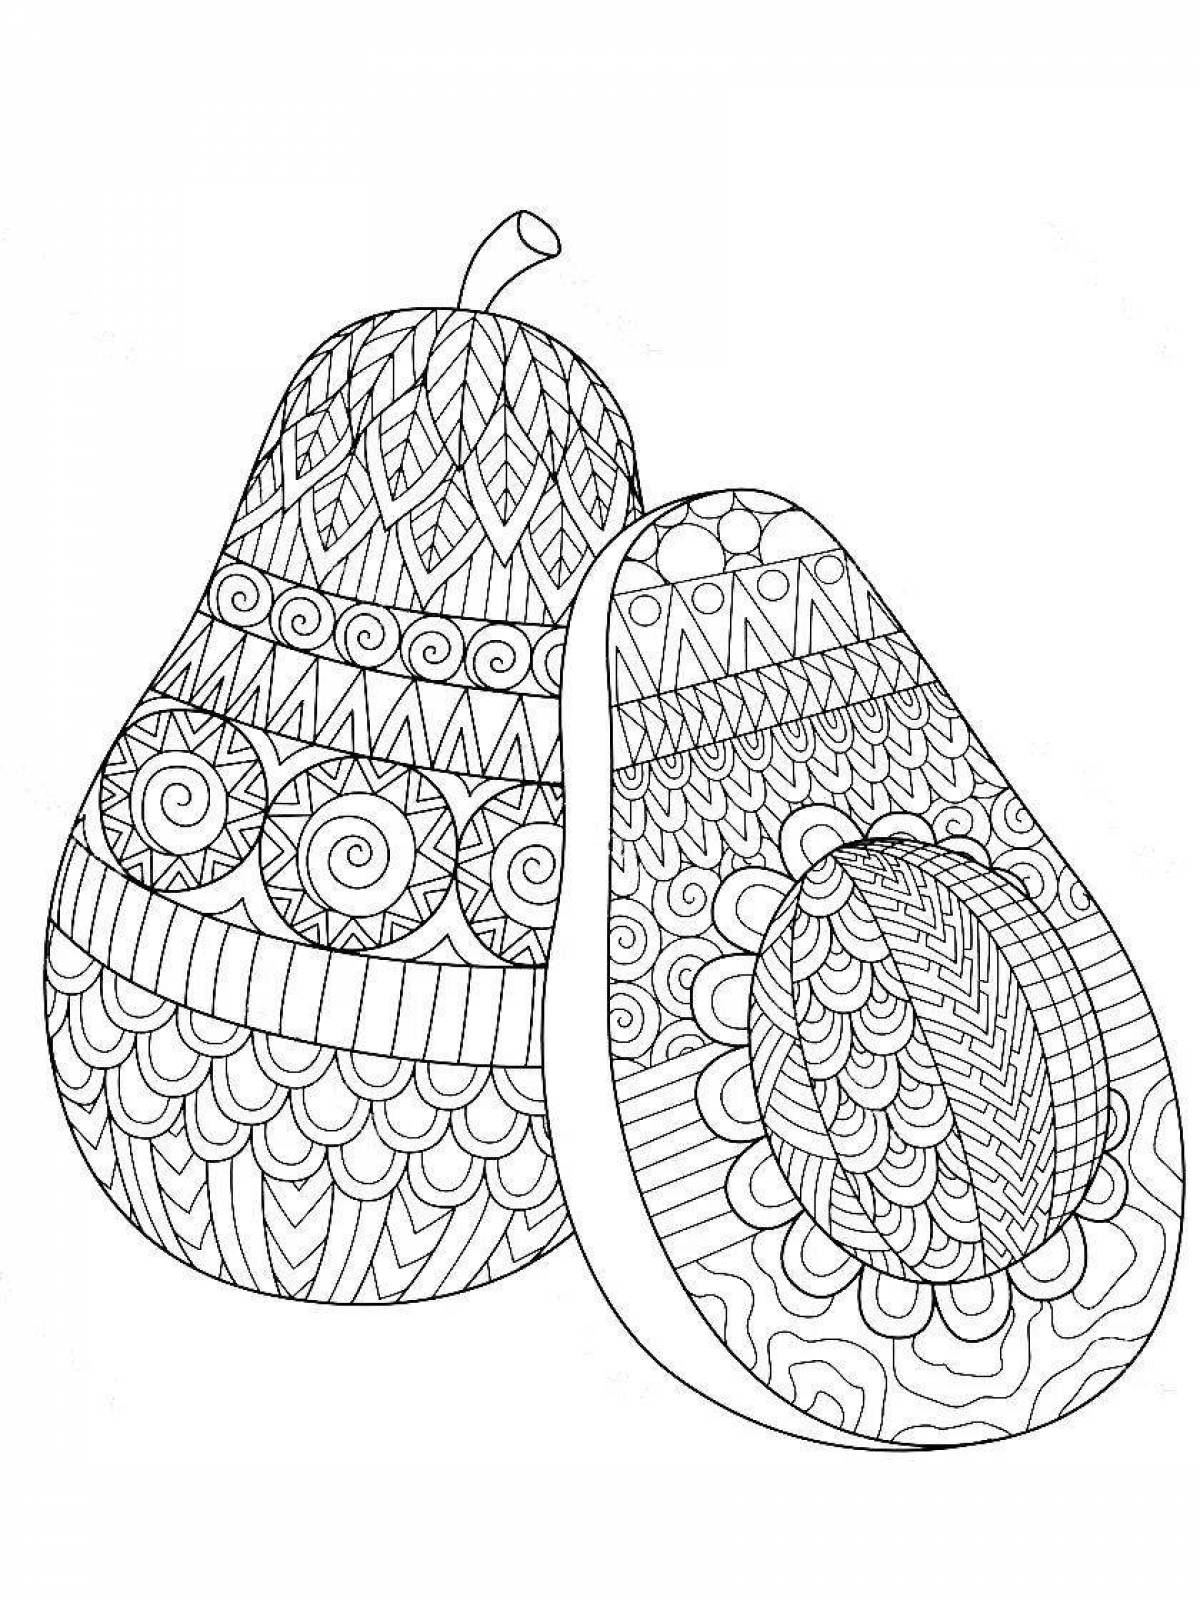 Bold avocado coloring page for girls